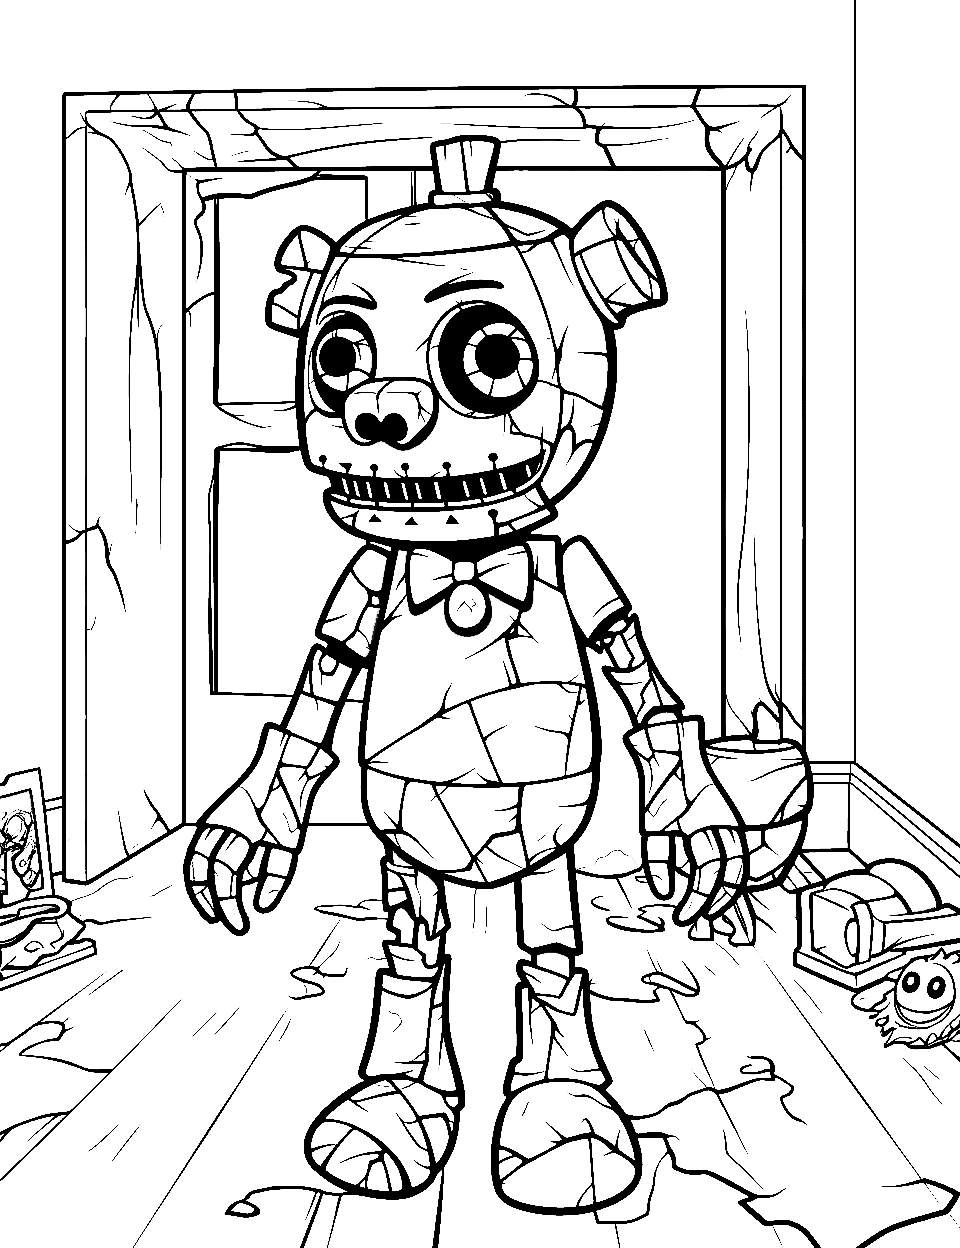 Withered Animatronic Five Nights at Freddys Coloring Page - A withered animatronic character looking lost in an abandoned room.